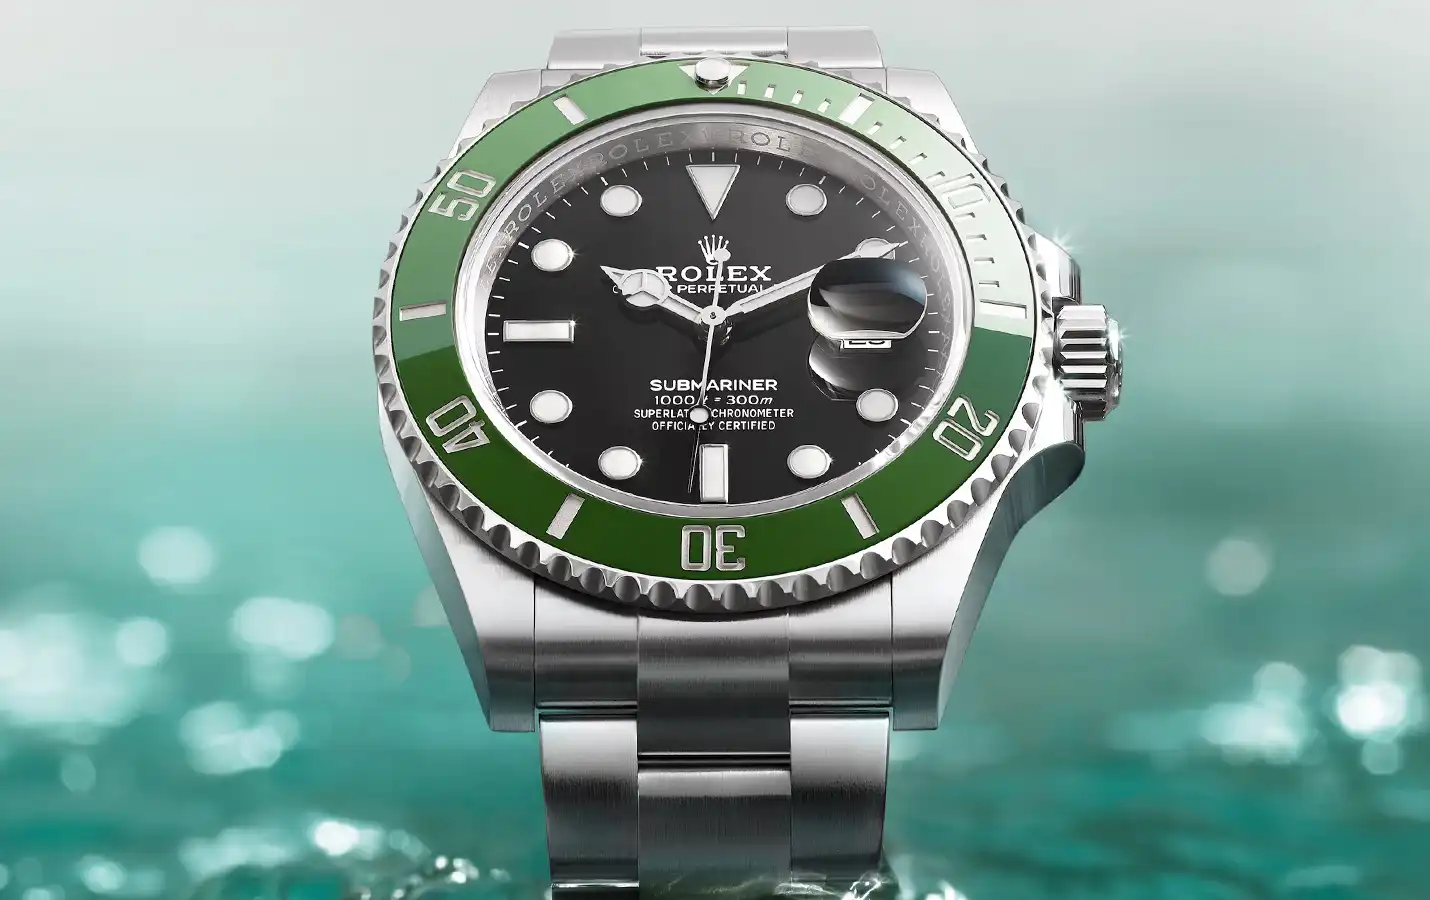 Rolex Submariner Date Acero 126610 LV WatchProject 21